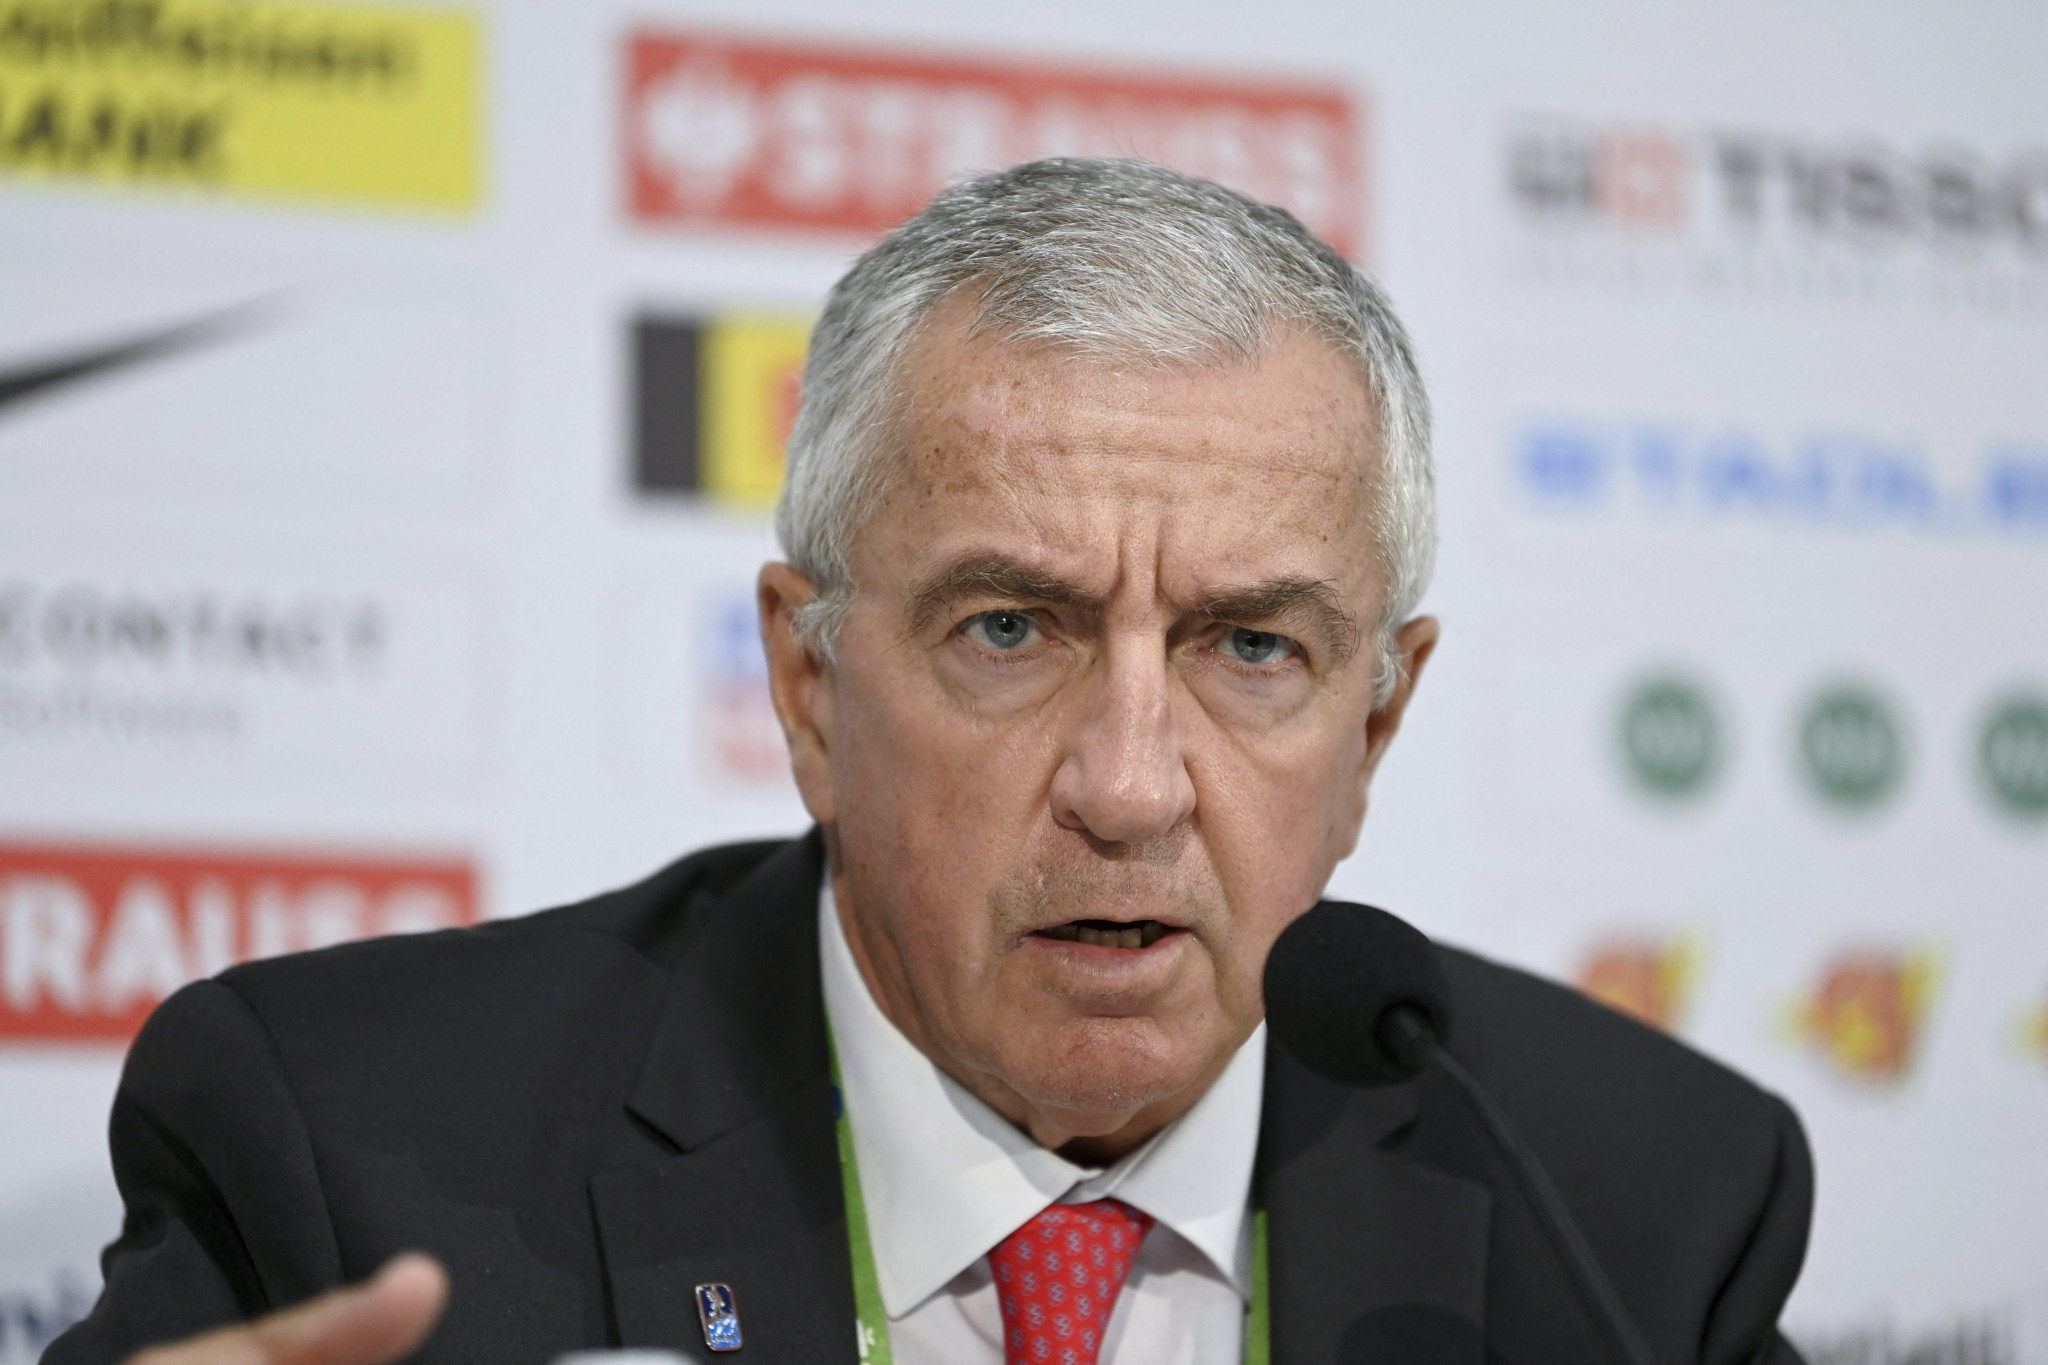 IIHF open to Russia and Belarus return "when war is over" says President Tardif